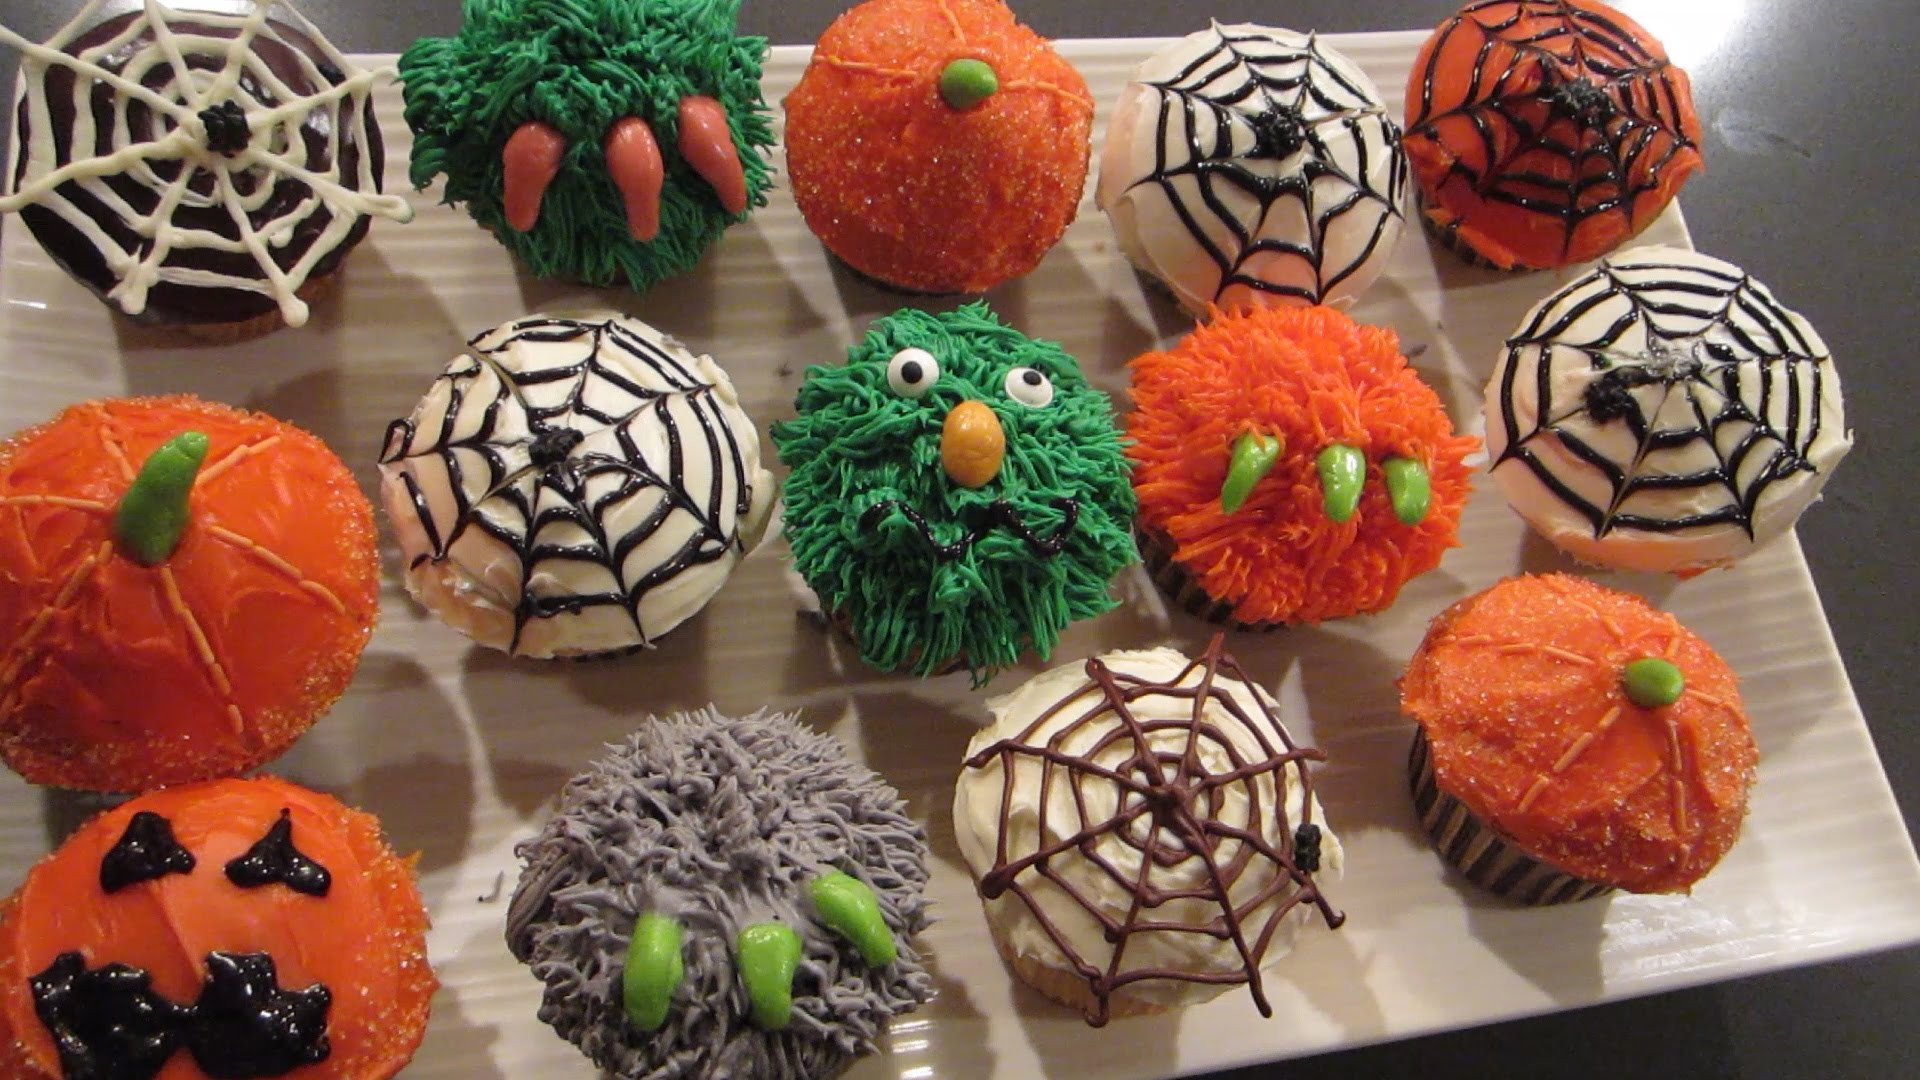 Halloween Cupcakes Decorations
 Top 15 Halloween cupcakes decorating ideas for You